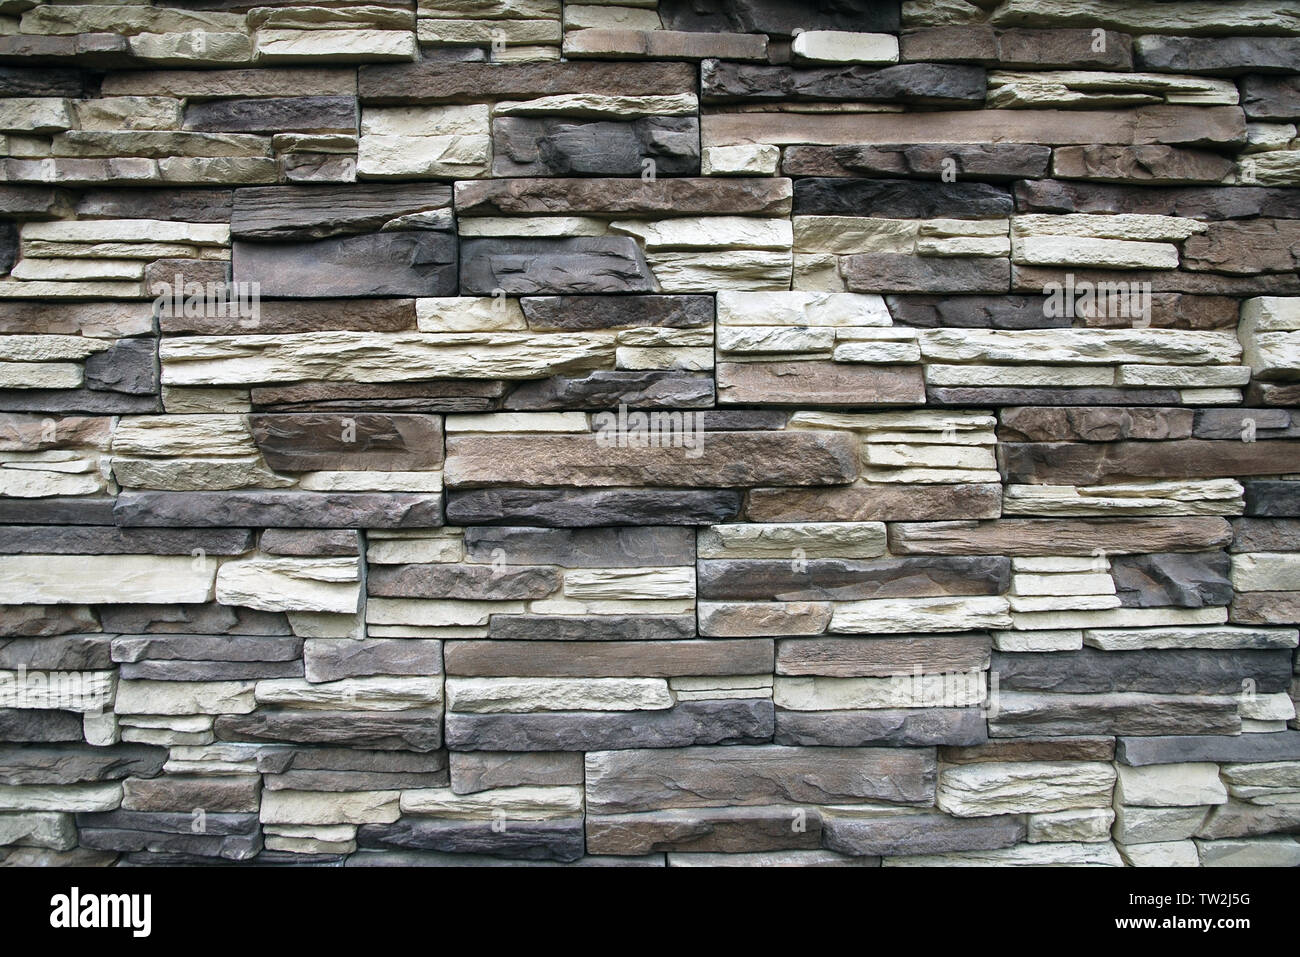 Stone wall texture background of narrow flat stones in brown, gray,beige colors Stock Photo